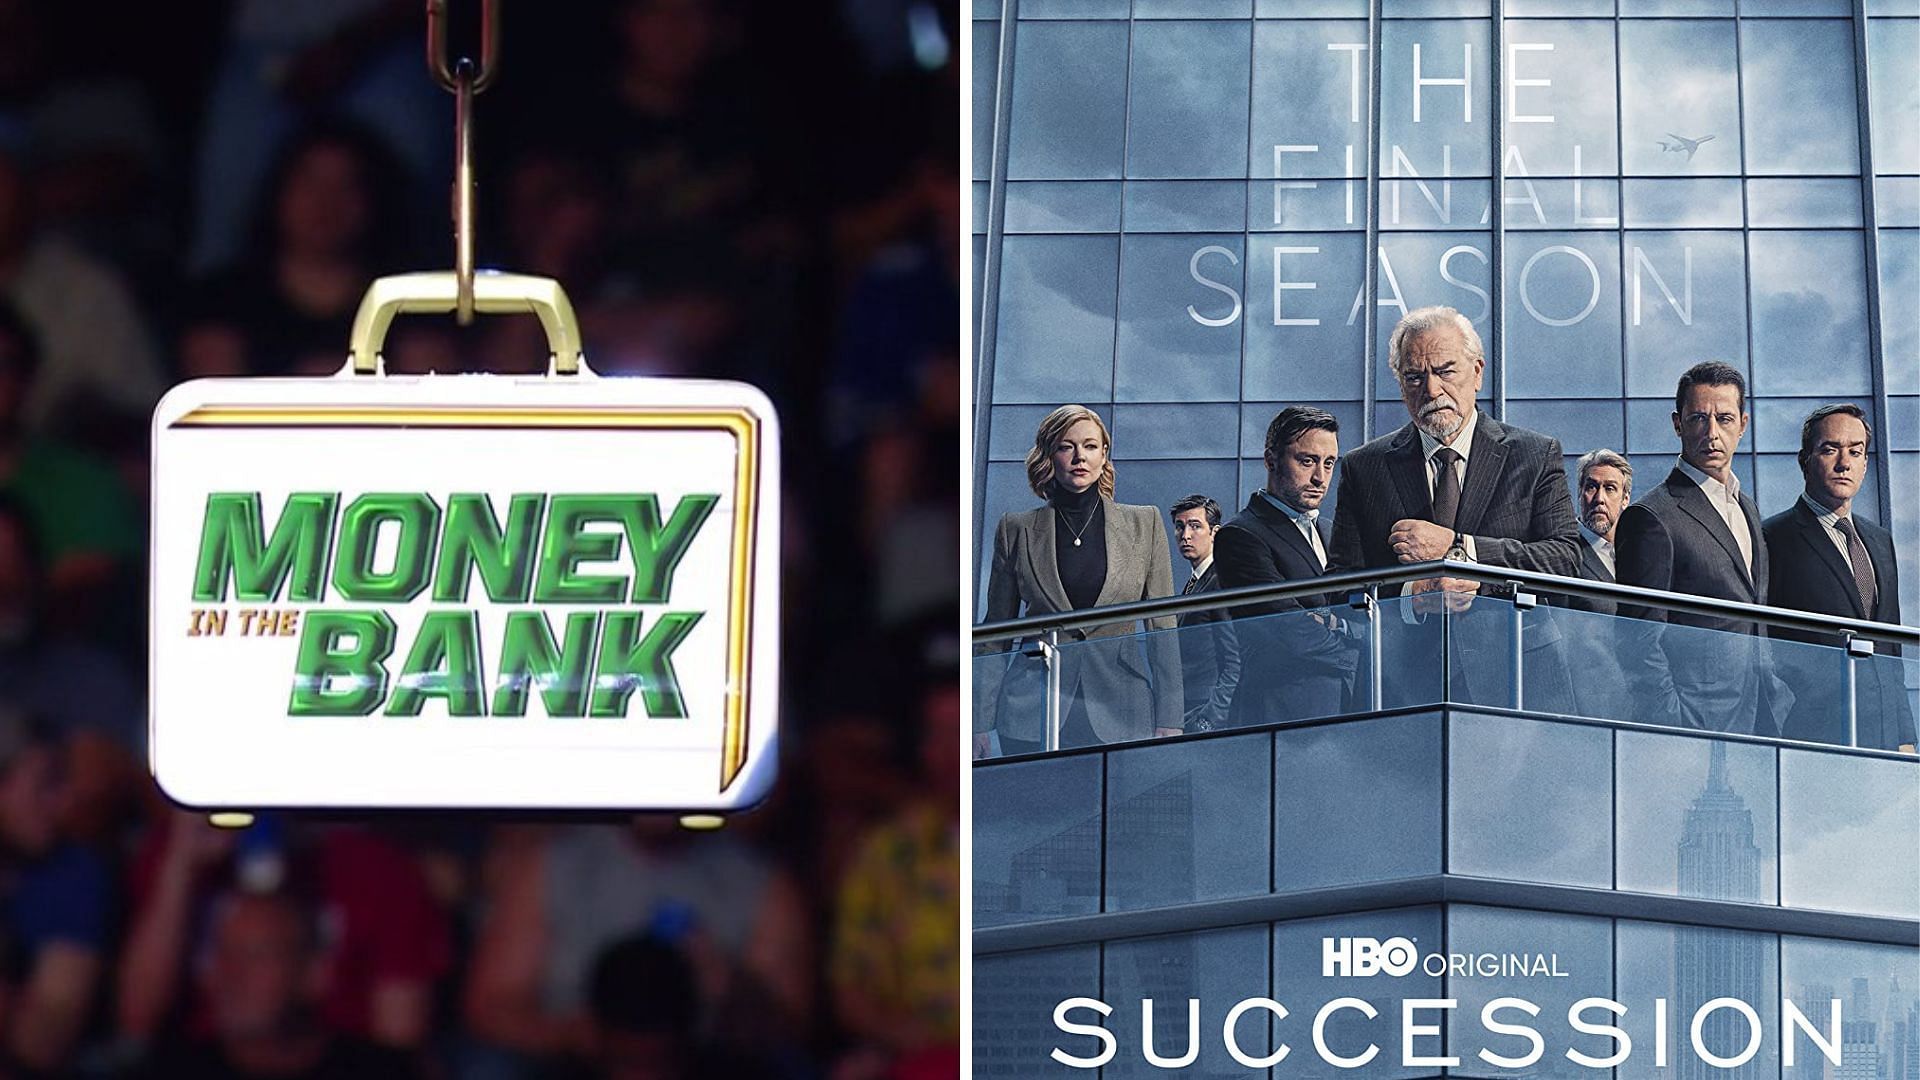 WWE Money in the Bank will air on July 1st.